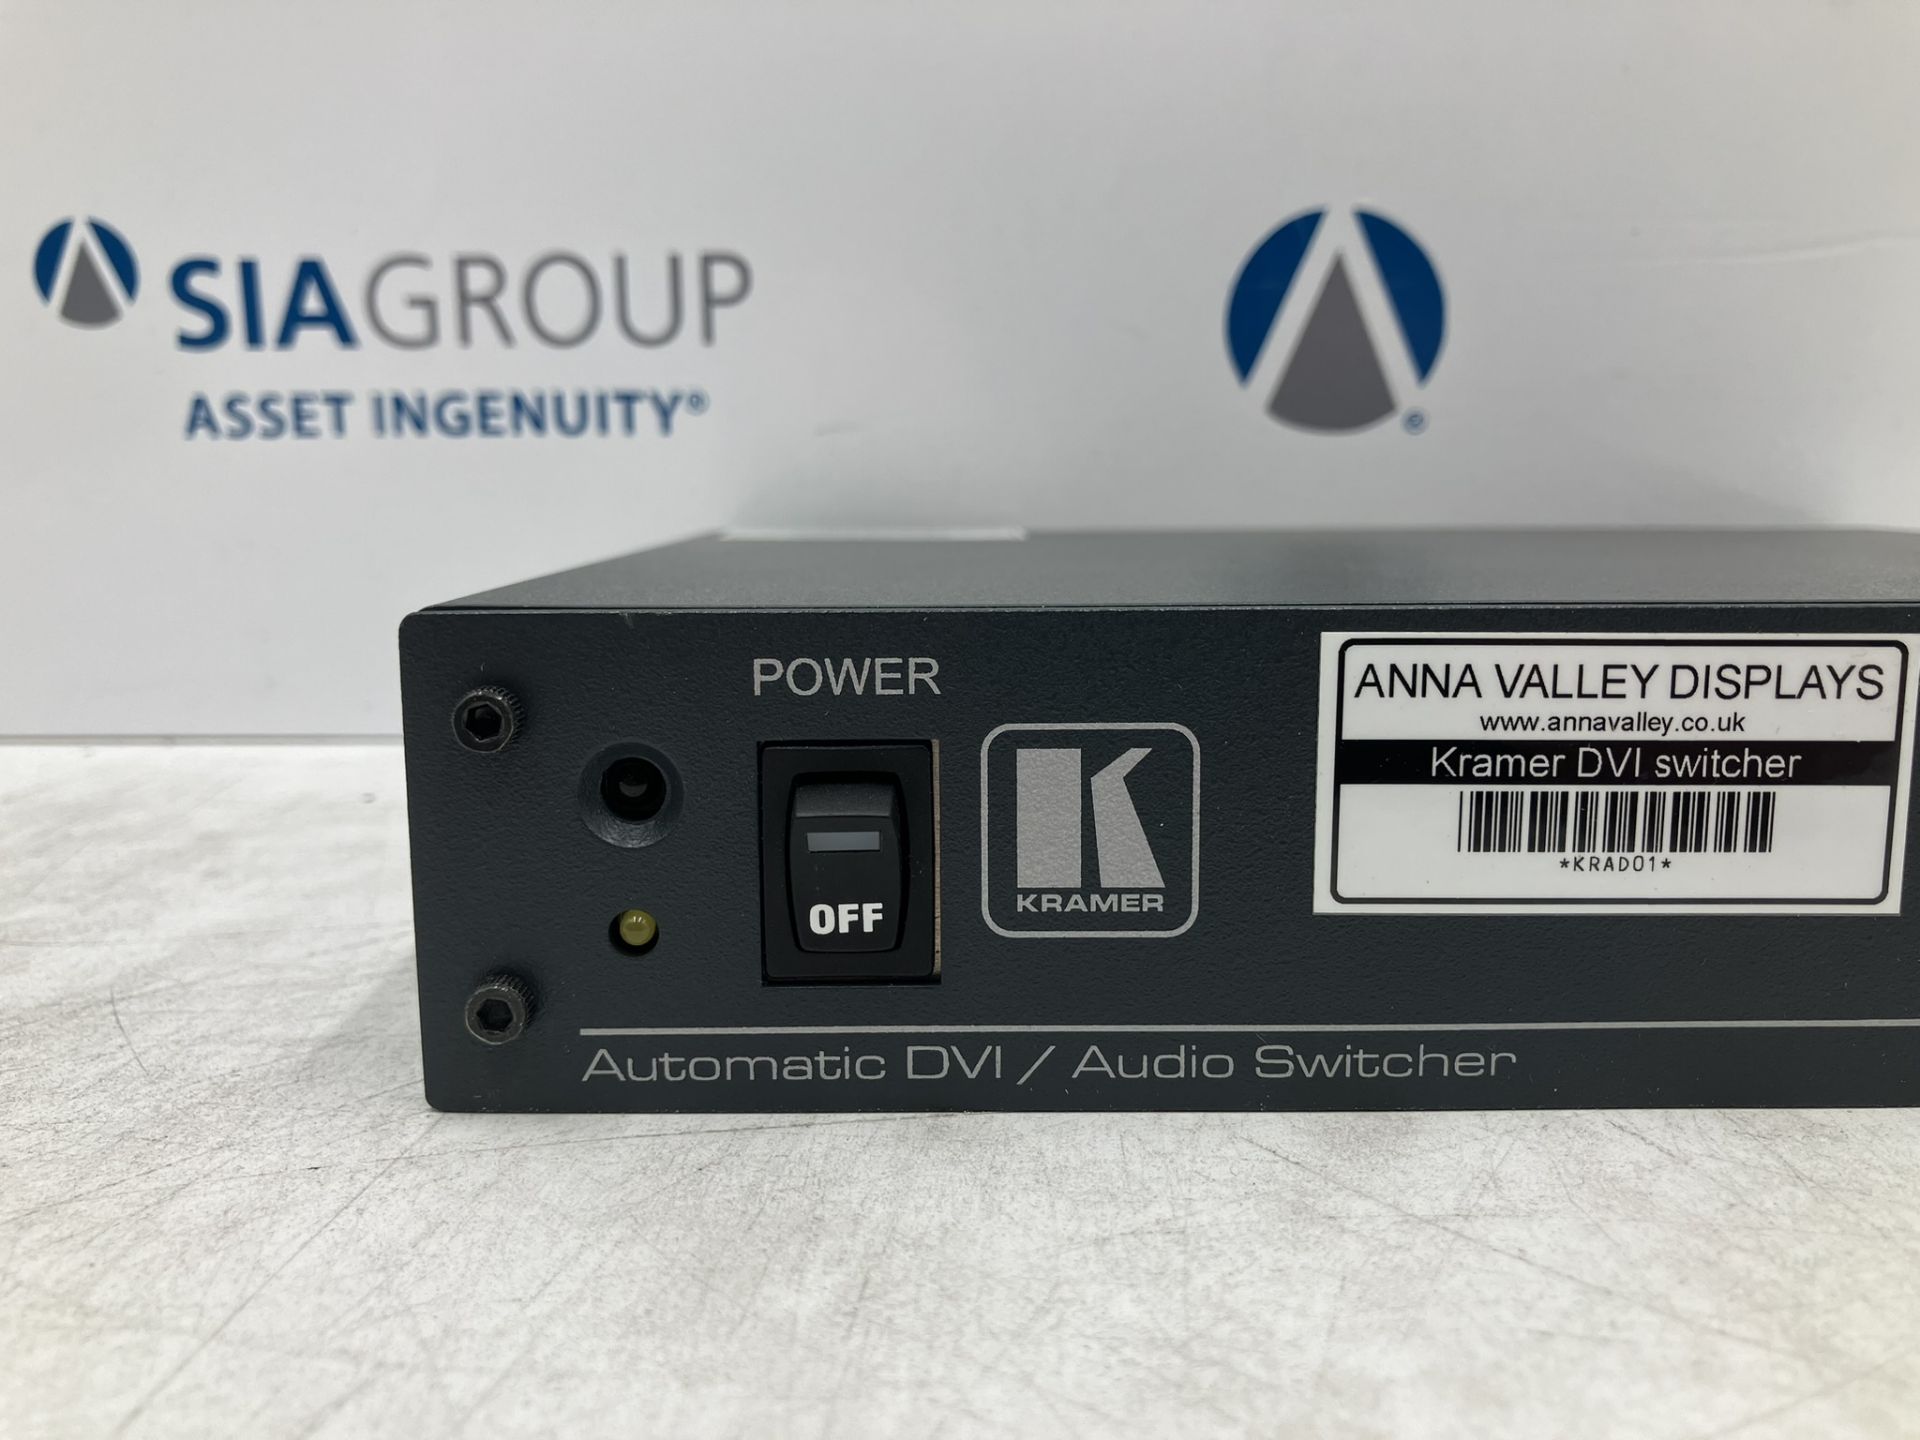 Kramer Swither VP-311 DVI Automatic DVI/Autoswither - Image 2 of 10